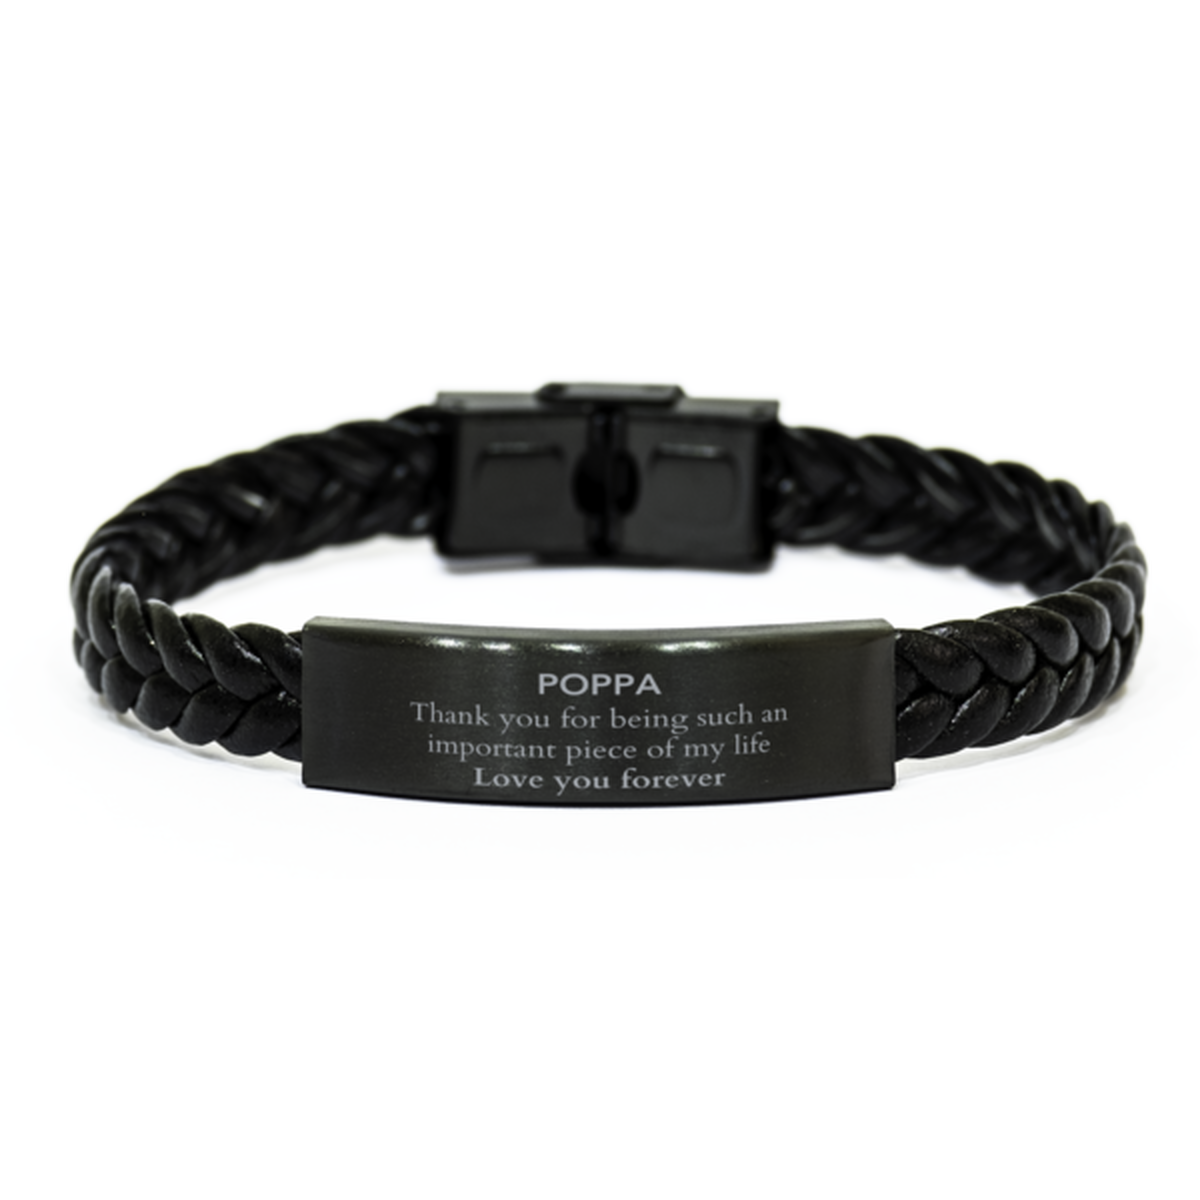 Appropriate Poppa Braided Leather Bracelet Epic Birthday Gifts for Poppa Thank you for being such an important piece of my life Poppa Christmas Mothers Fathers Day